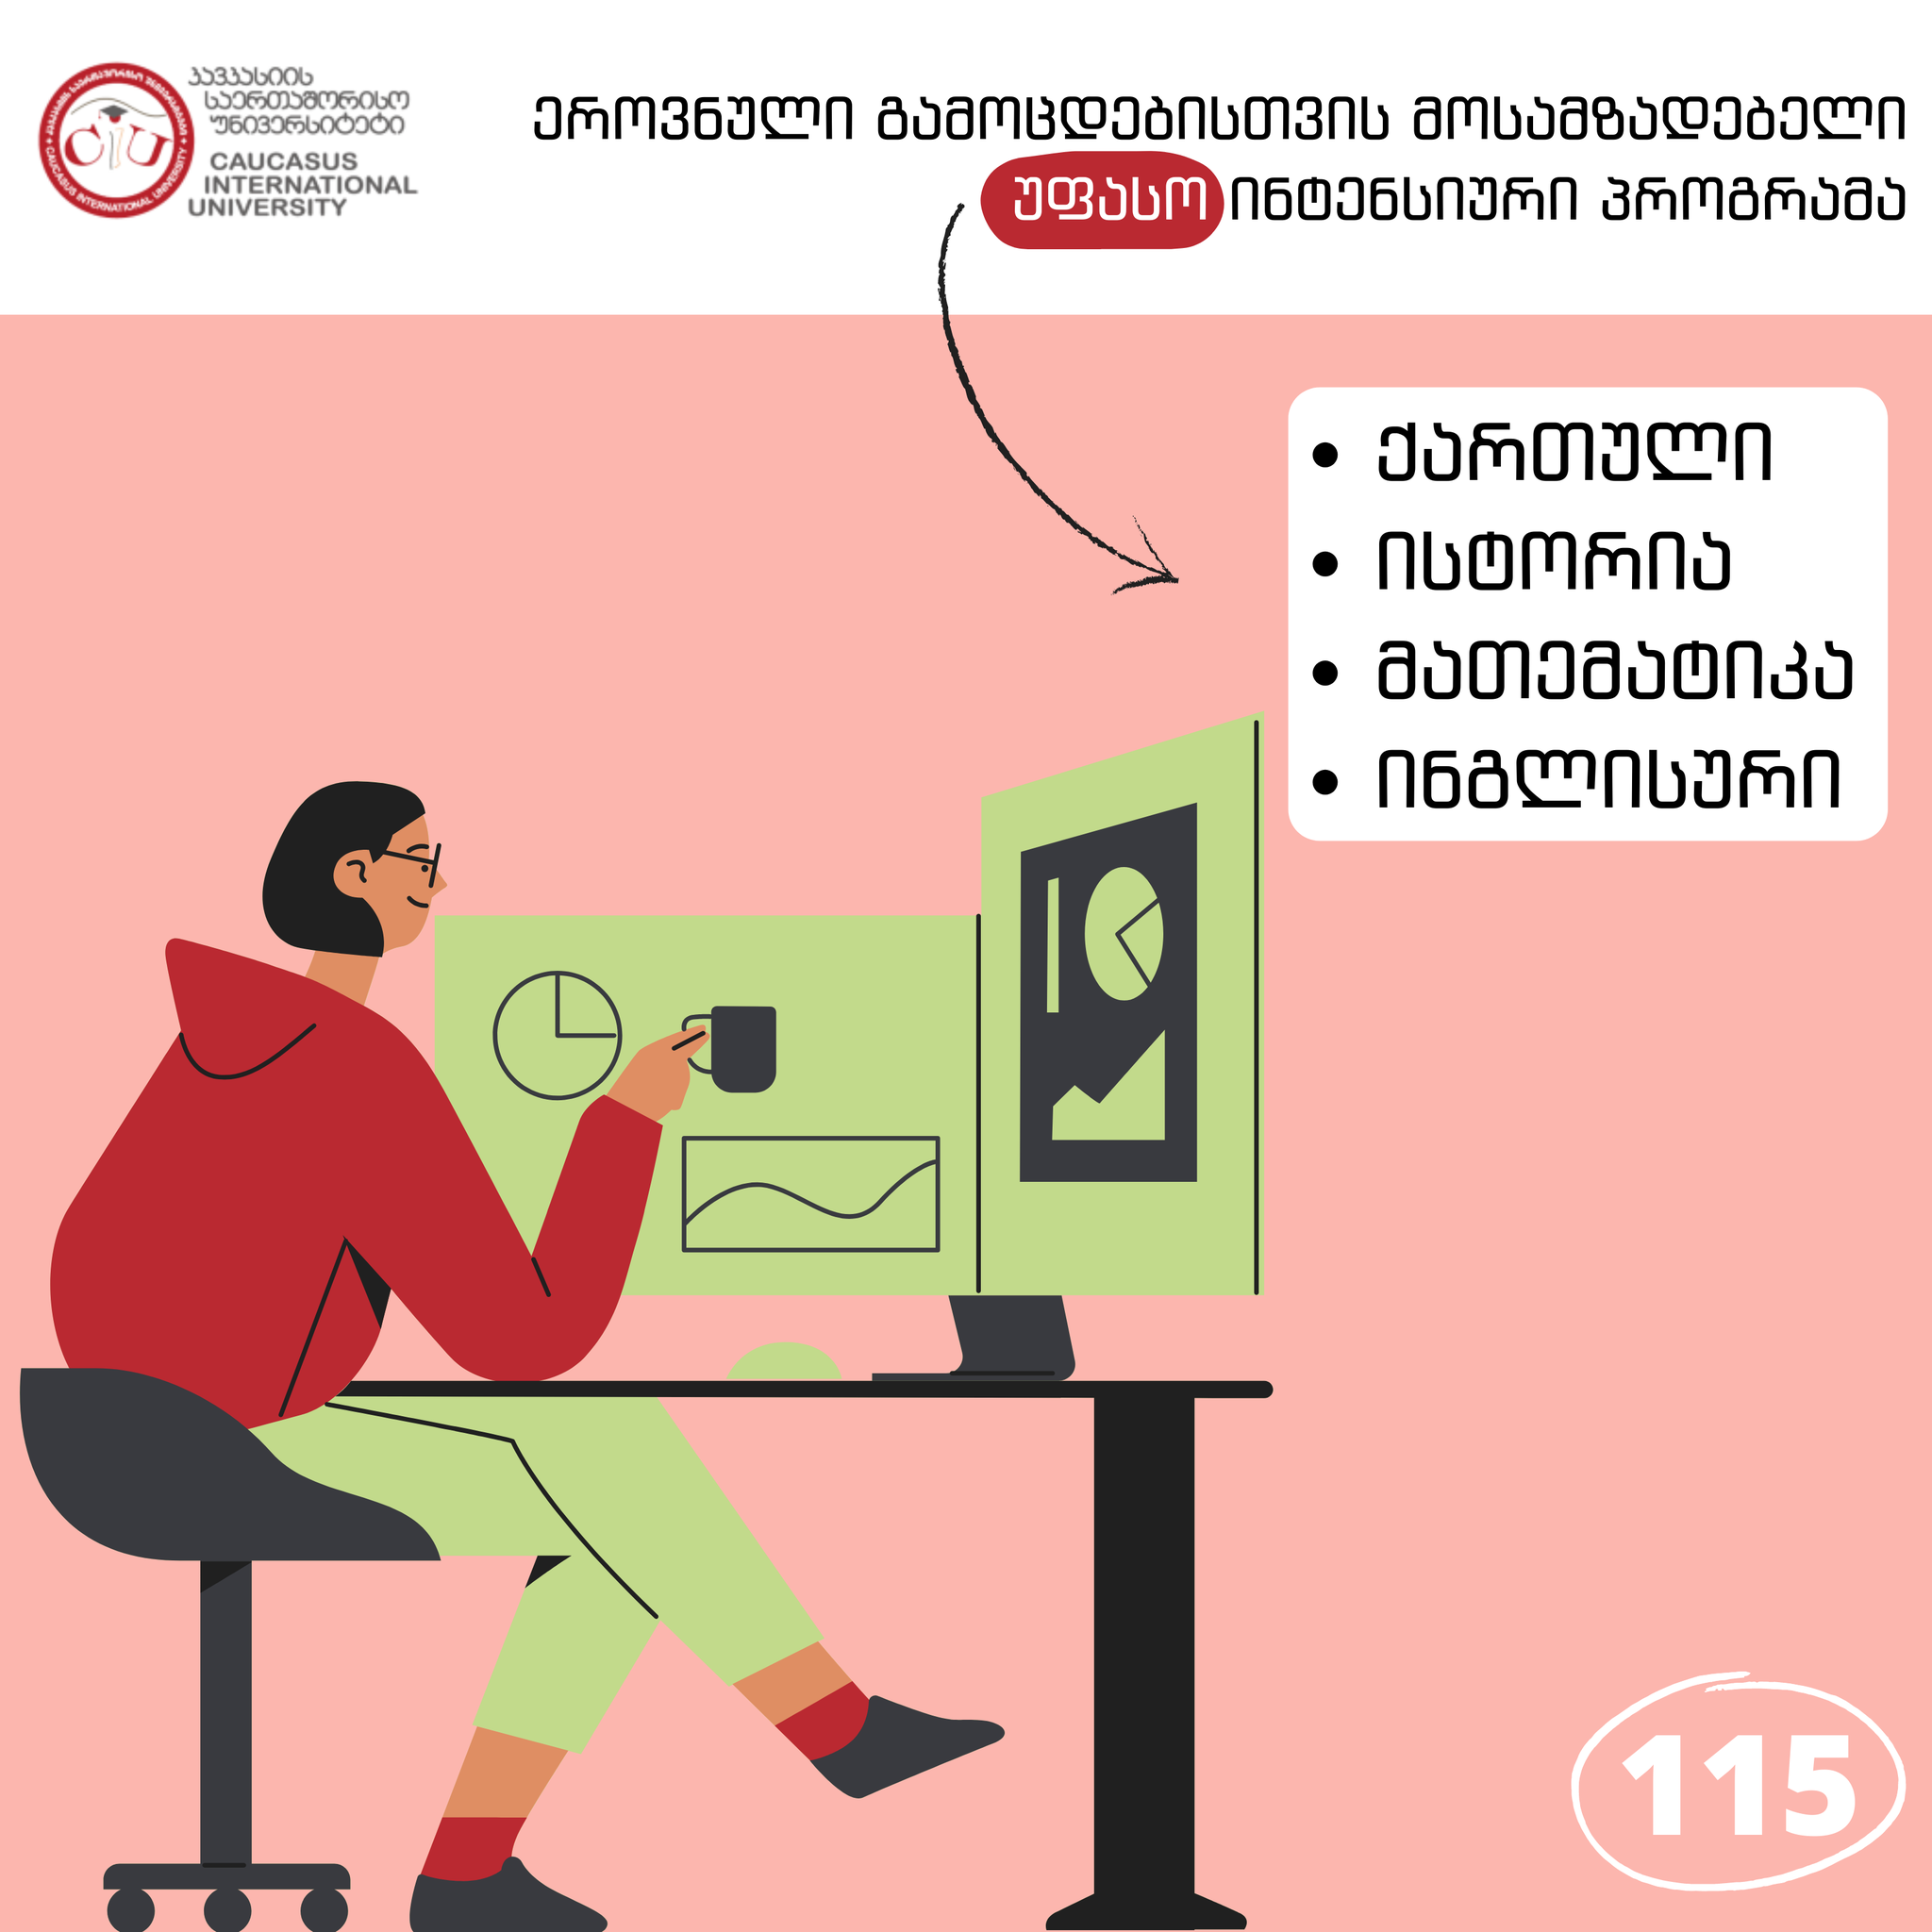  Caucasus International University Offers a Two-Month Free Training Program for Entrants